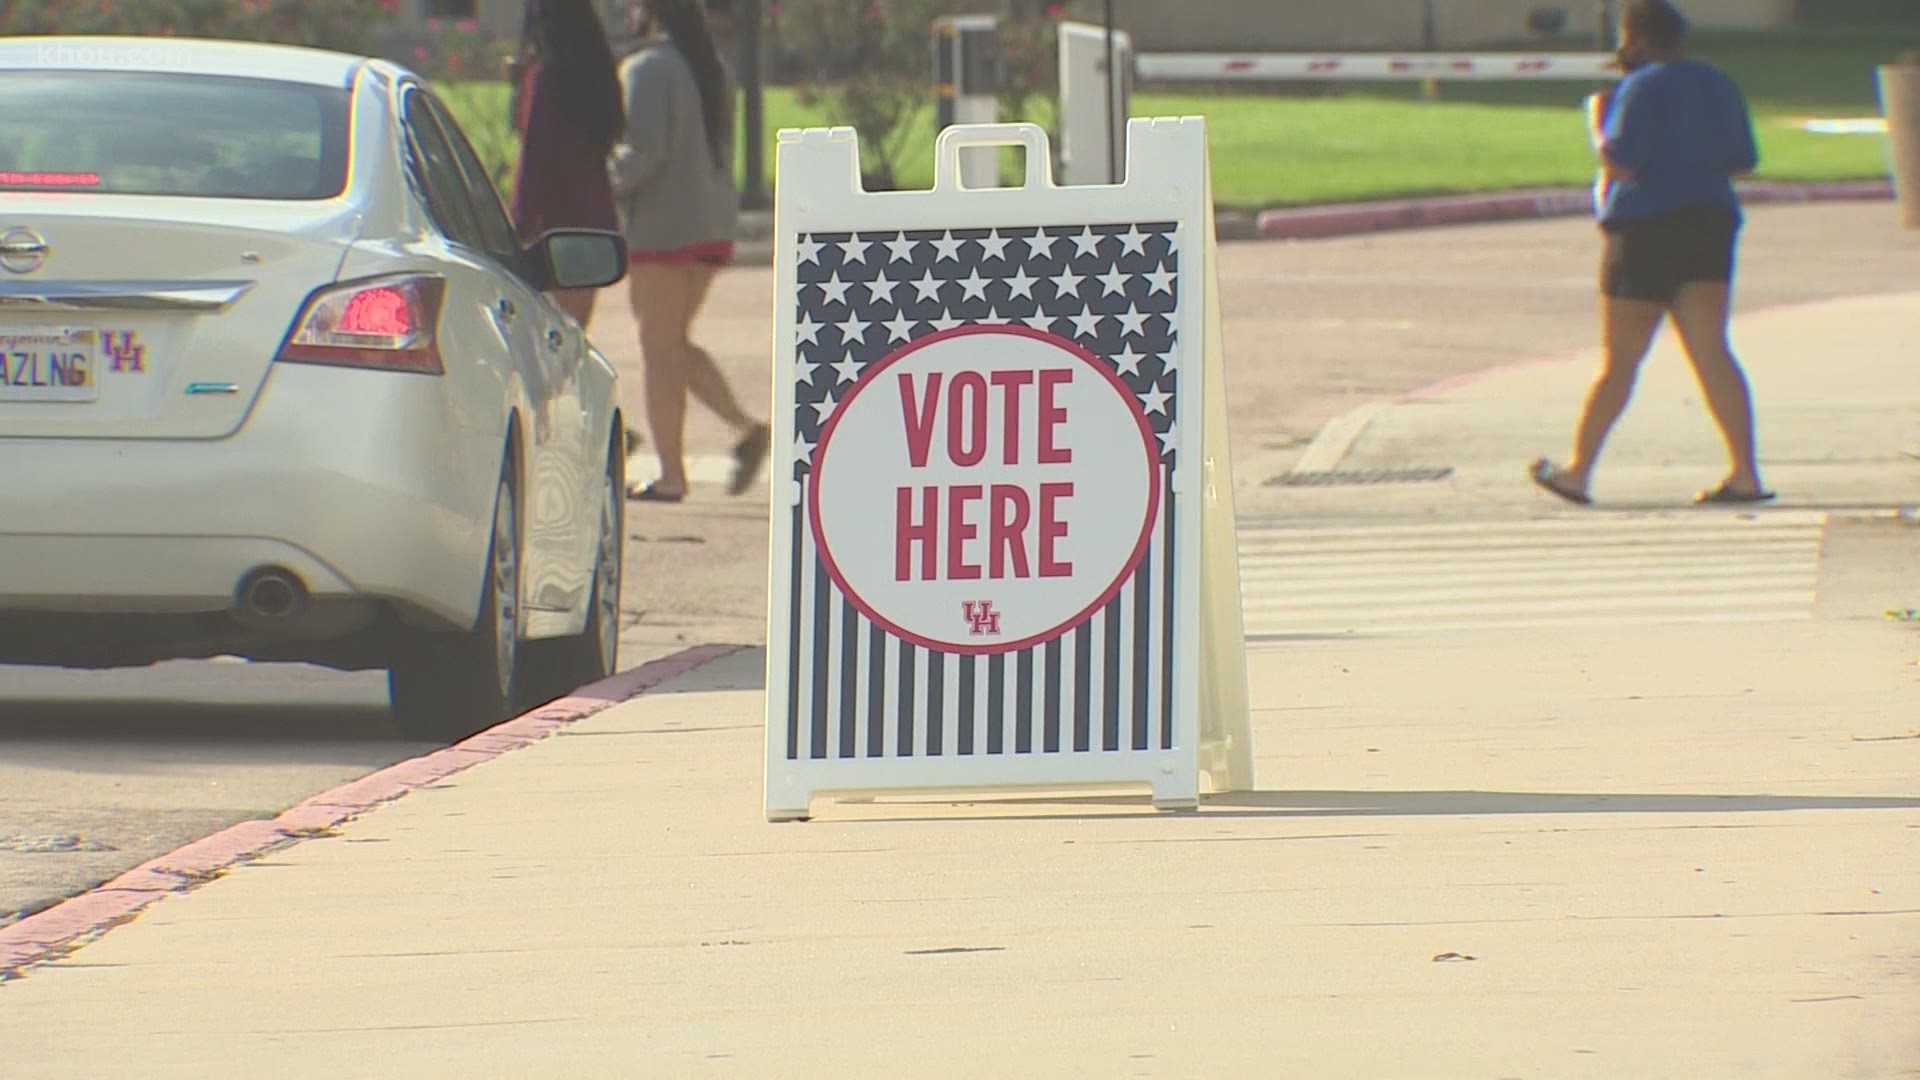 Some already voted at on-campus polling sites while others said they'll vote where they're registered.